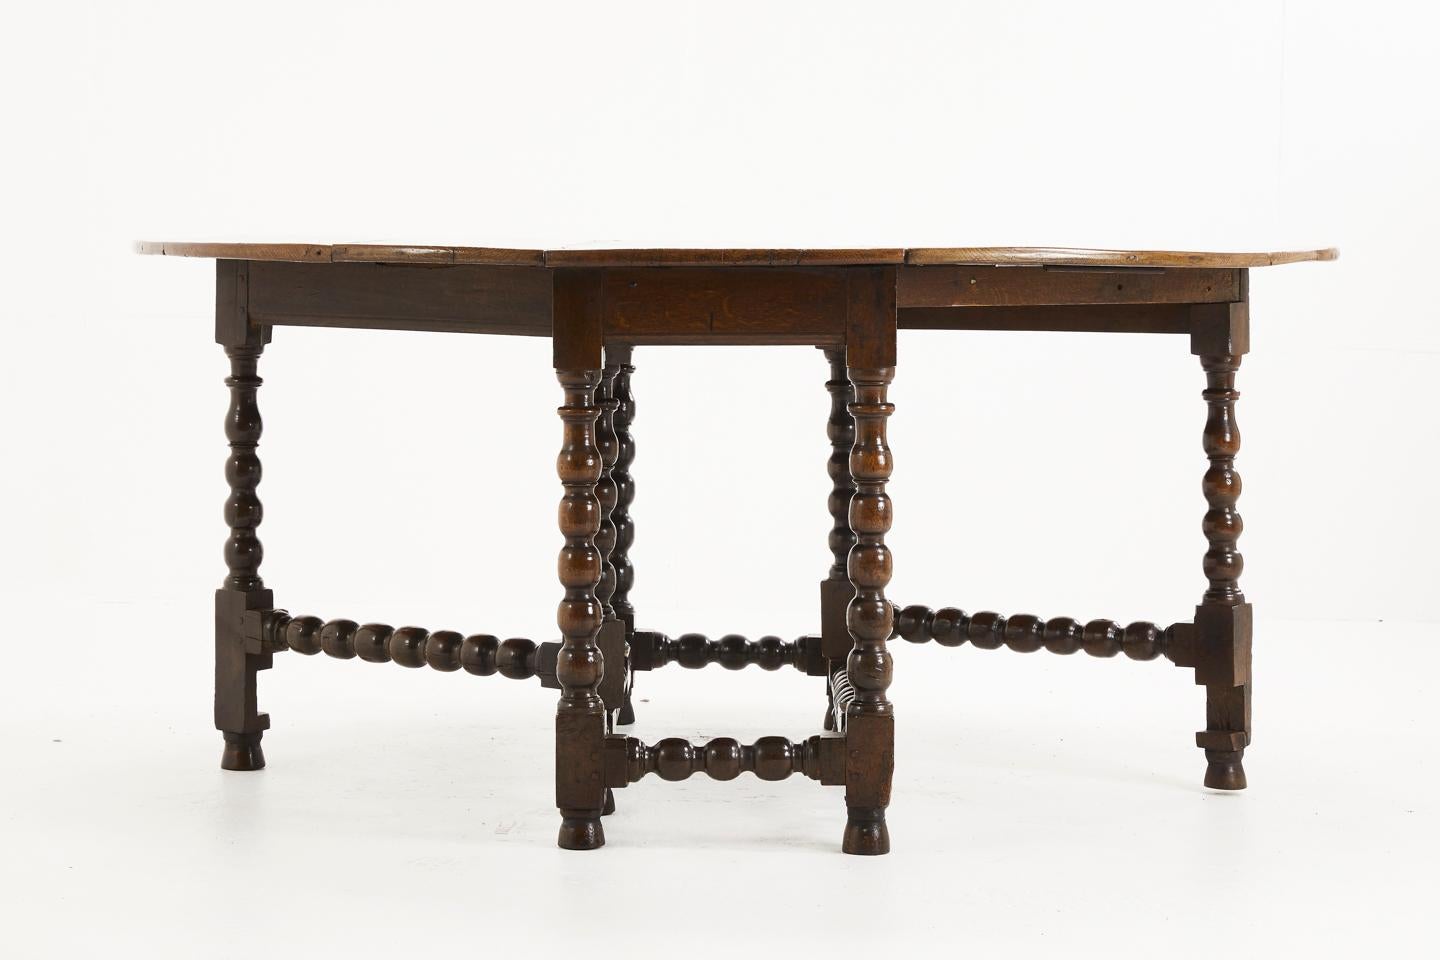 Large 17th century Charles II oak drop leaf table with bobbin turned gate legs. This wonderful table has been restored many times over the centuries. Having very rare and unusual gate leg stabilising-arm beneath, 
circa 1680.

Dimensions when